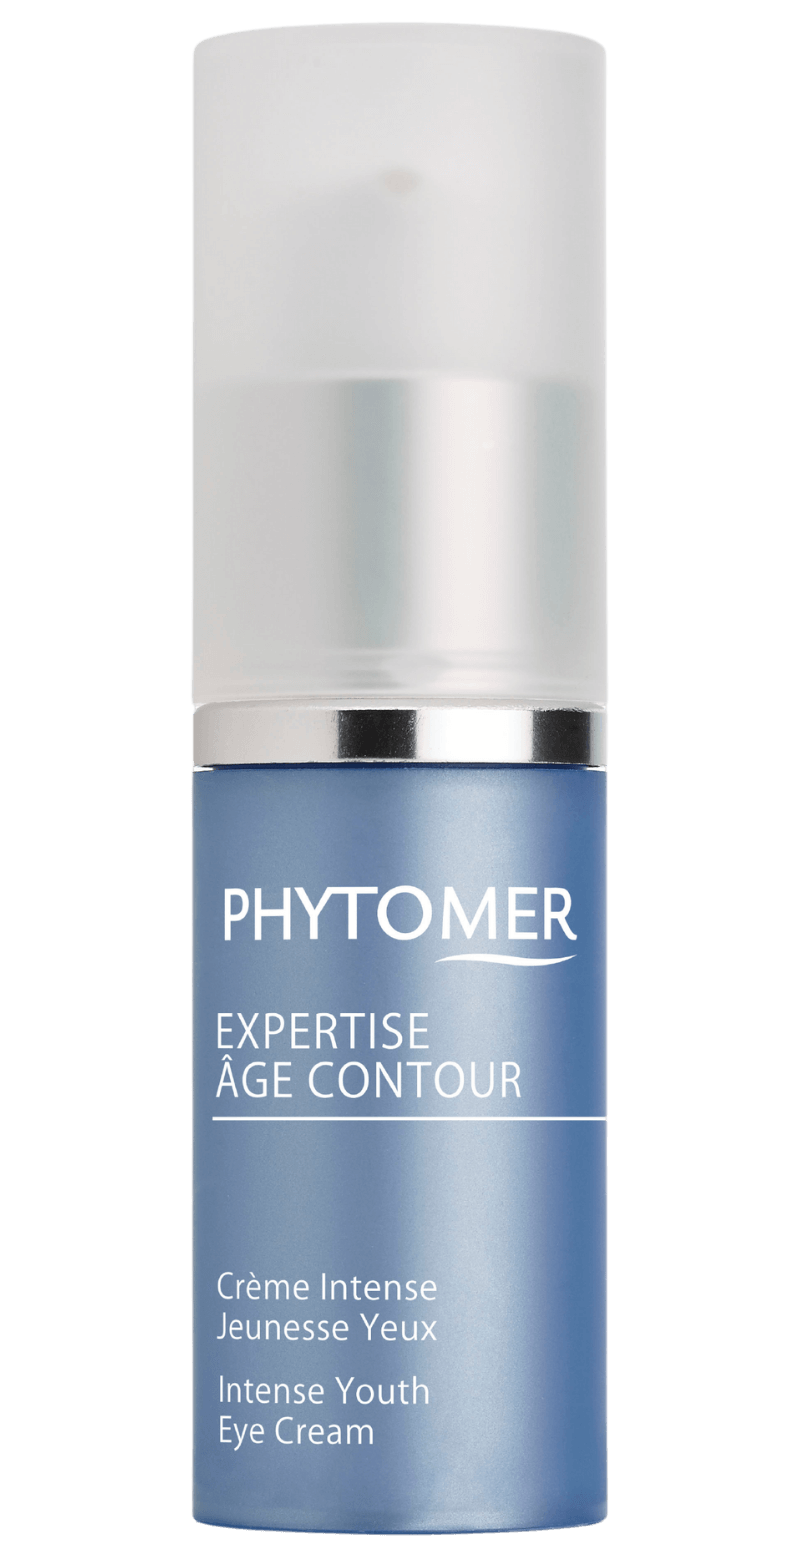 &#39;s Phytomer EXPERTISE AGE CONTOUR Intense Youth Eye Cream - Bellini&#39;s Skin and Parfumerie 